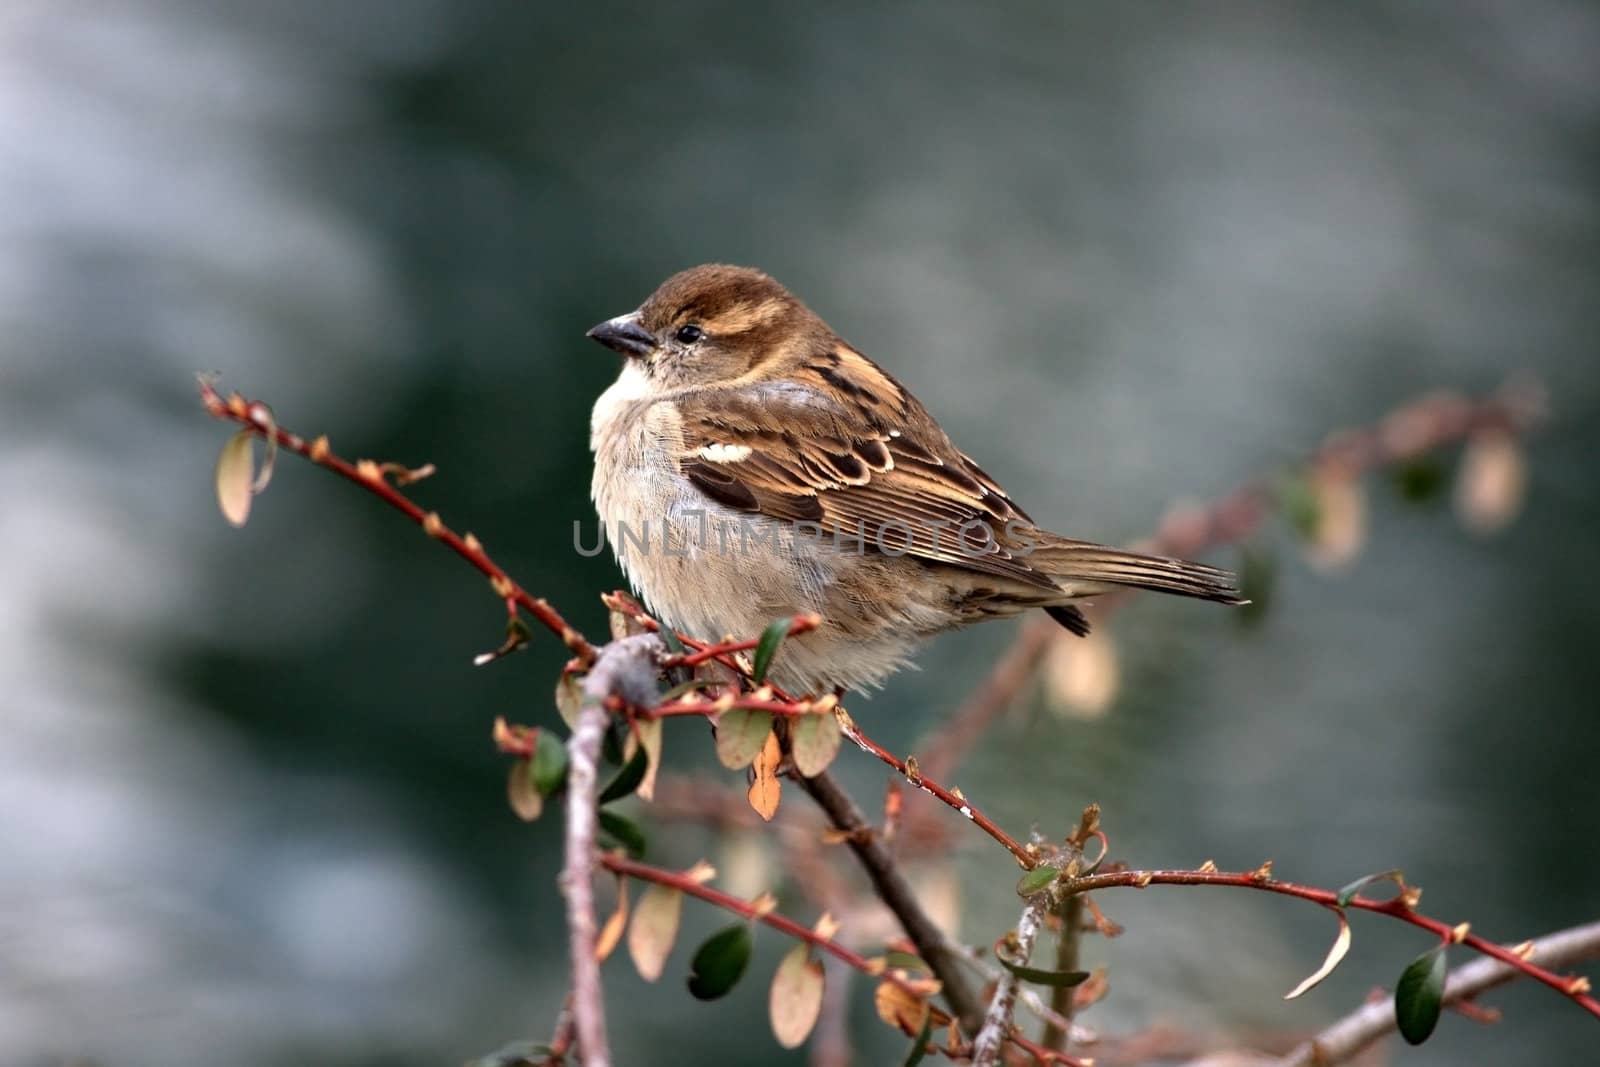 Sparrow by monner